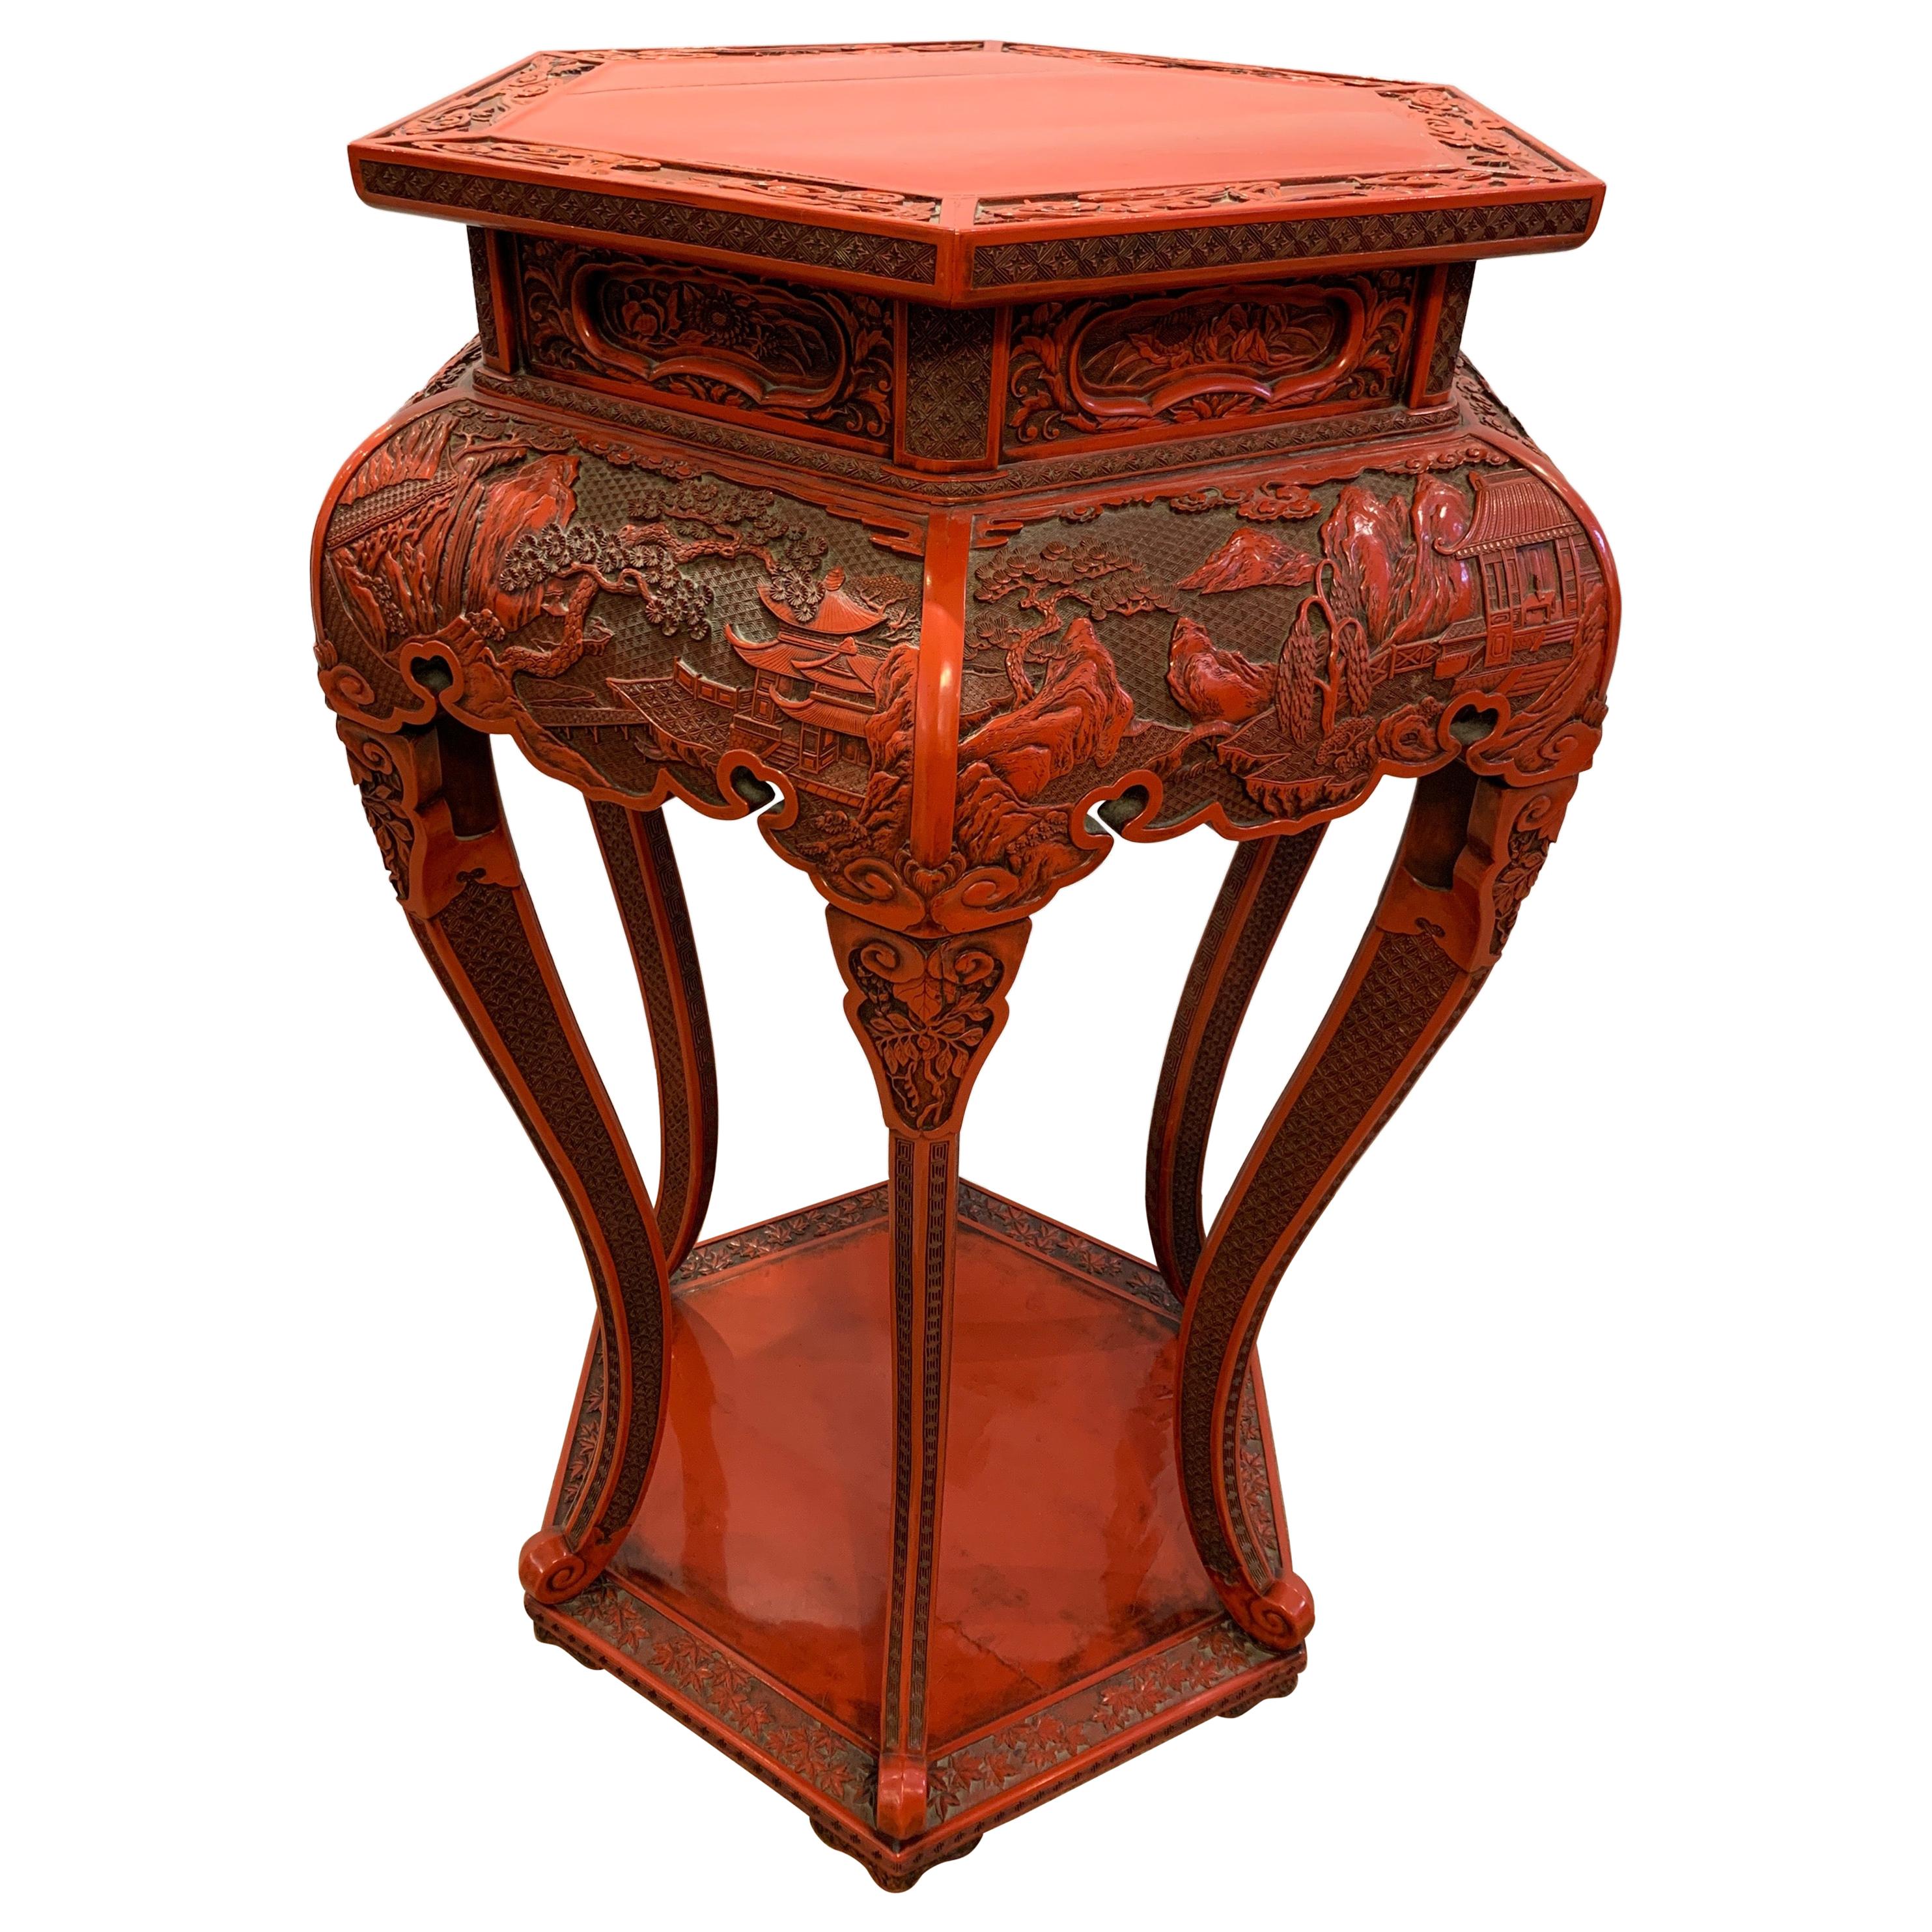 Post War Chines Red Lacquer Carved Wood Cinnabar Stand